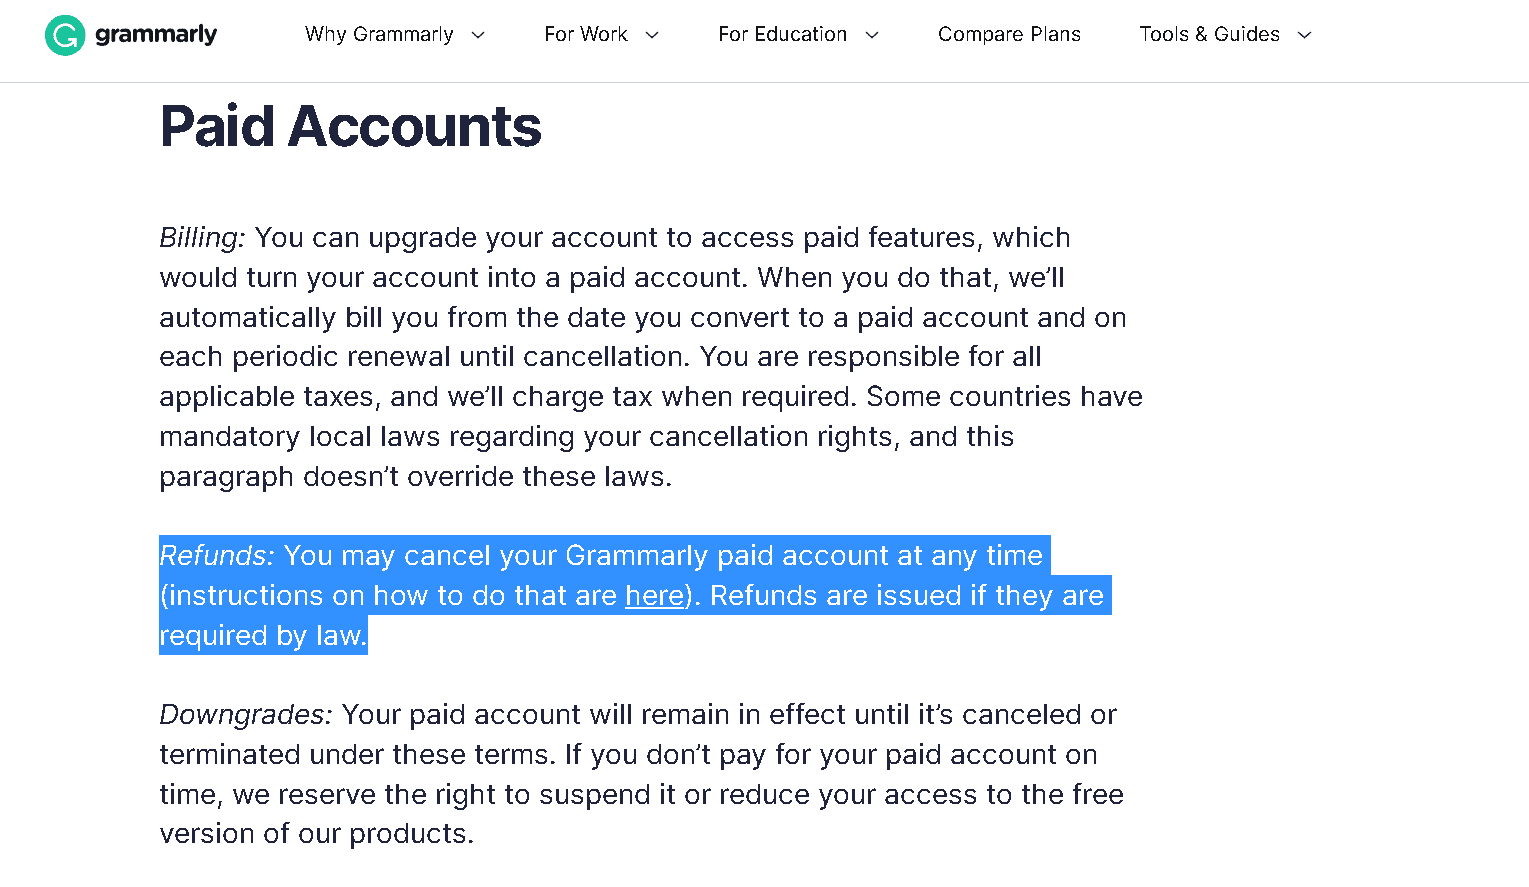 Grammarly Premium accounts are not refundable